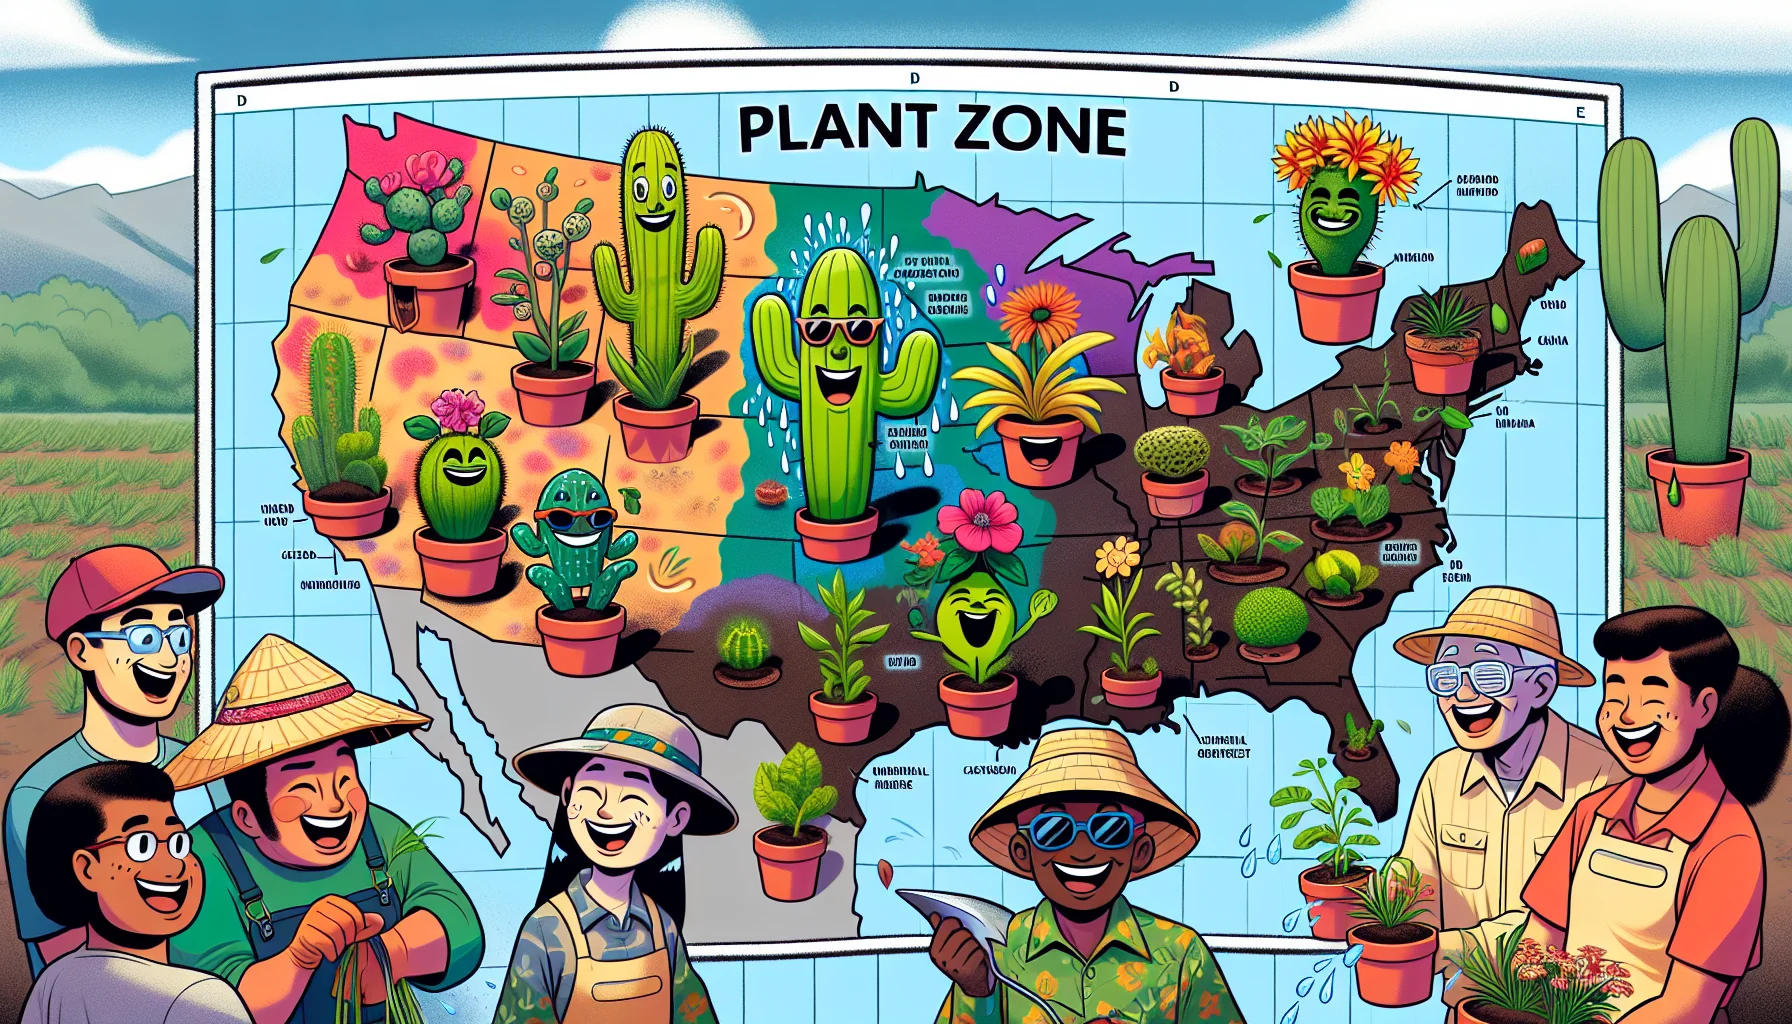 Create an image of a large map detailing various plant zones represented by fun and funky cartoon plants. Each zone is adorned with plants that grow best in that area with expressive faces, such as a cactus in the desert zone with sunglasses or a tropical plant in the rainforest zone with a rain hat. In the forefront, depict a diverse group of people: an Asian woman, a Black man, a Hispanic elderly man, a Middle-Eastern young boy and a Caucasian woman, all laughing and gardening wearing funky gardening hats. Include some humor like a plant surprising a person with a cold splash of water, to portray gardening as a fun activity.